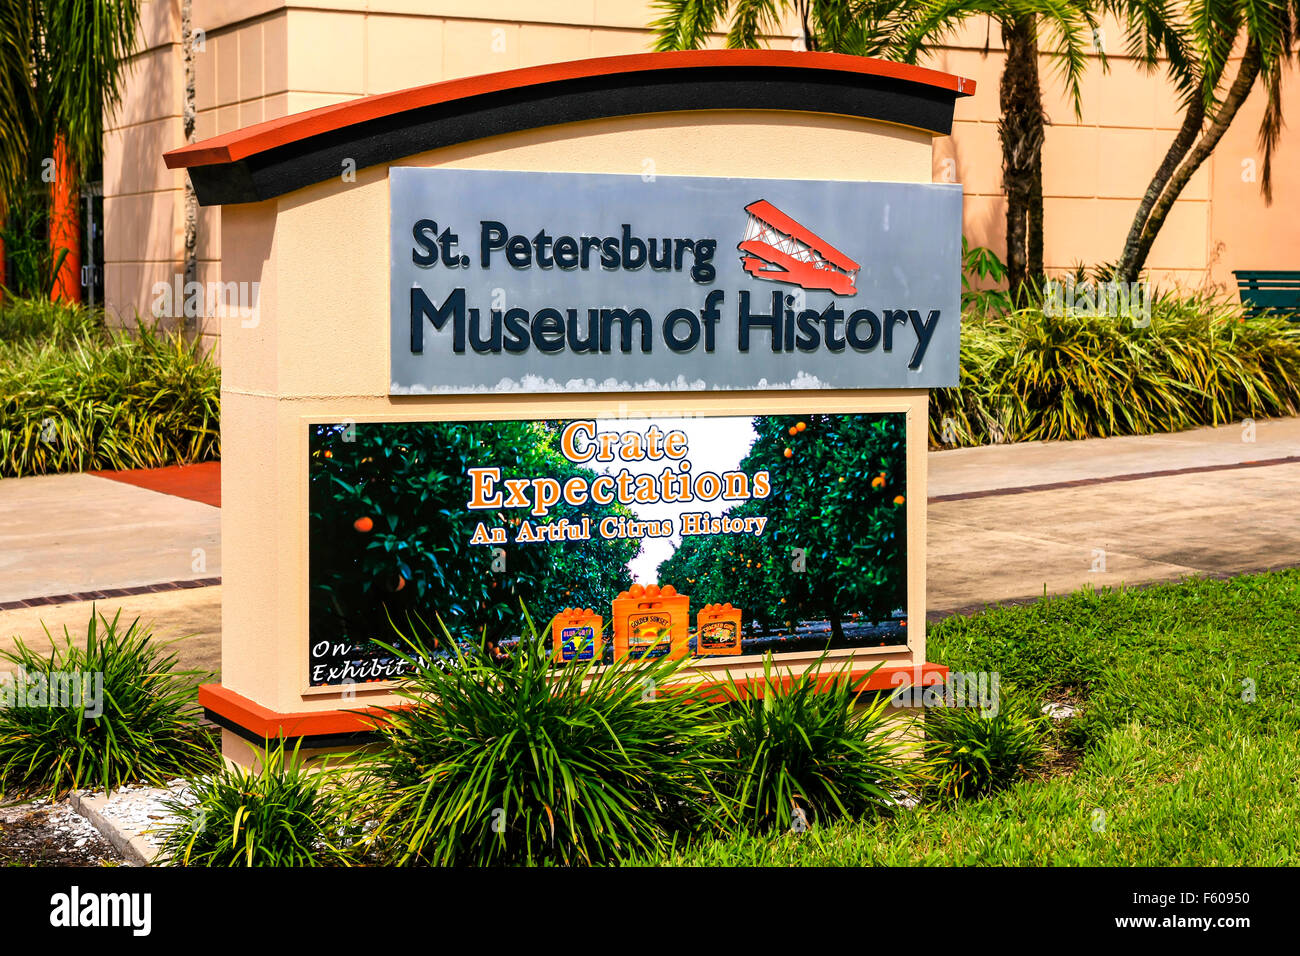 The sign outside the St. Petersburg Museum of History on 2nd Ave in this Florida city Stock Photo